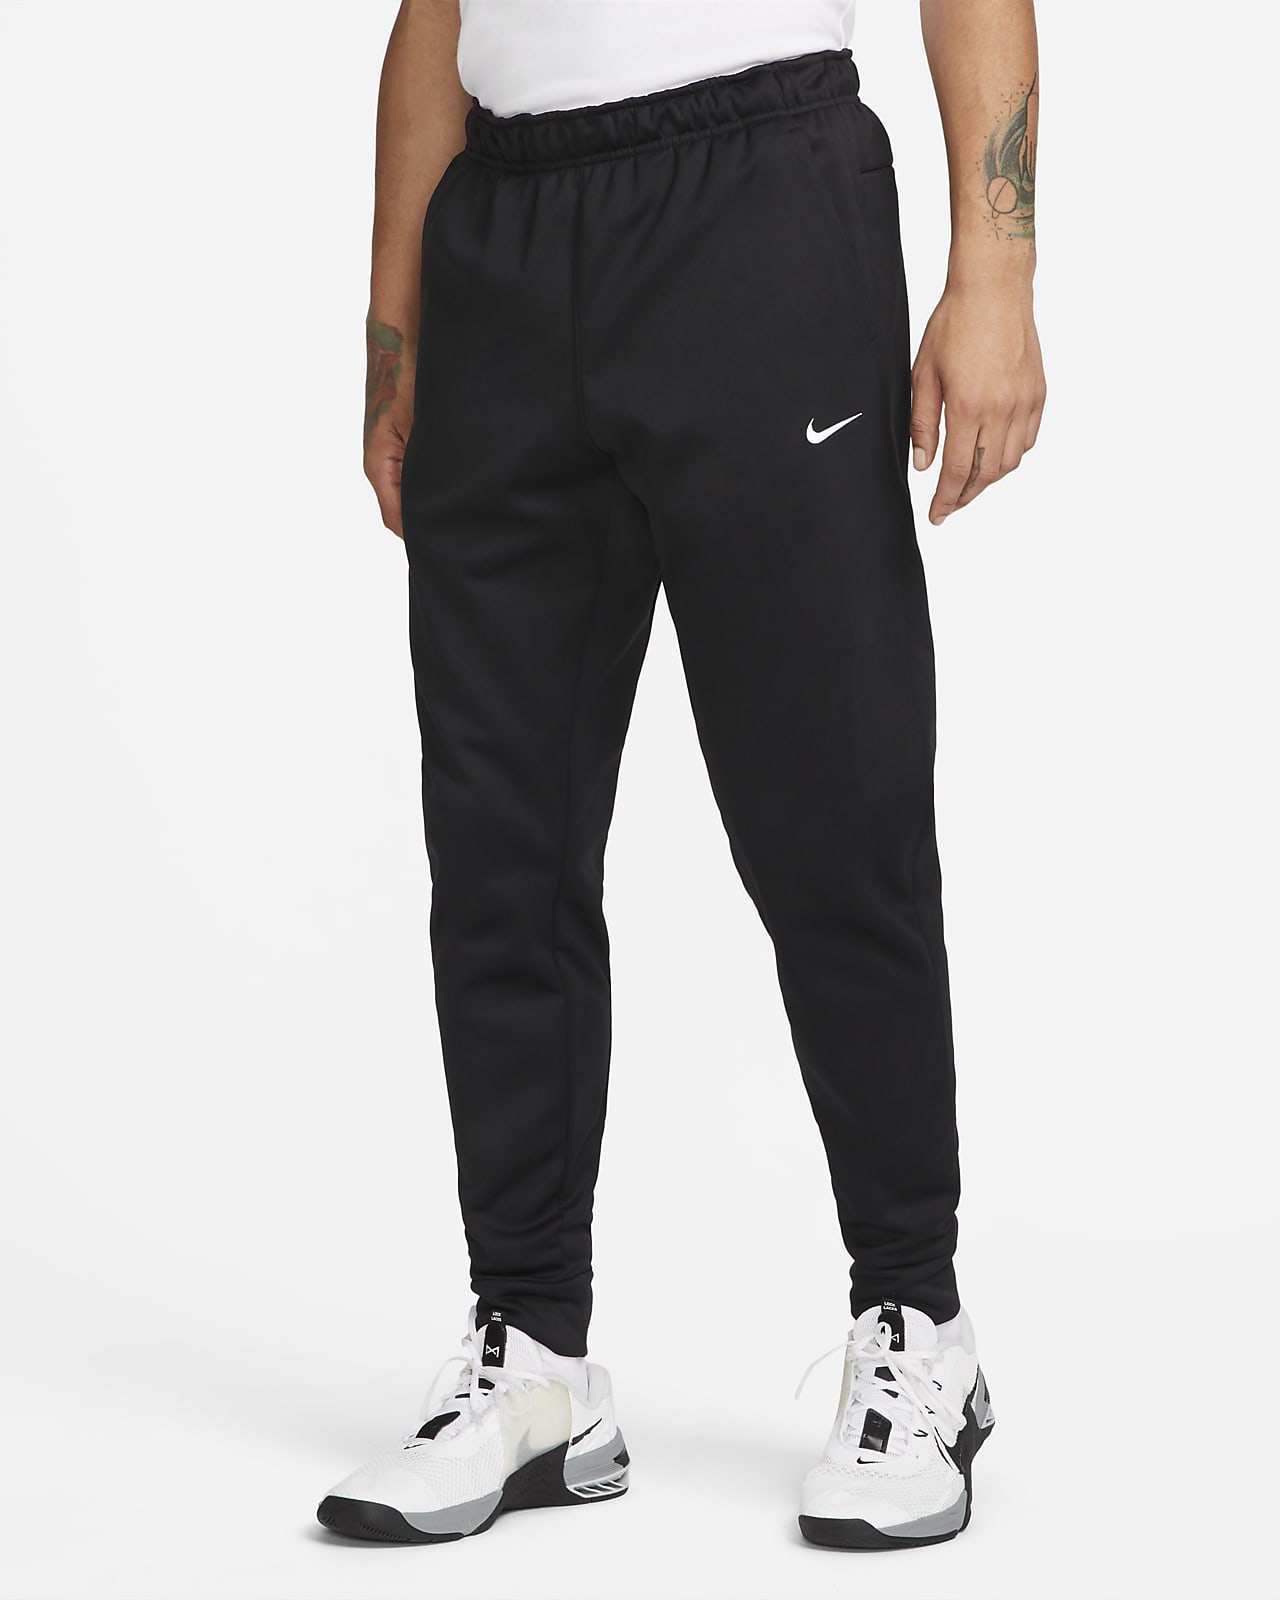 Nike Therma Pantalons cenyits de fitnes Therma-FIT - Home